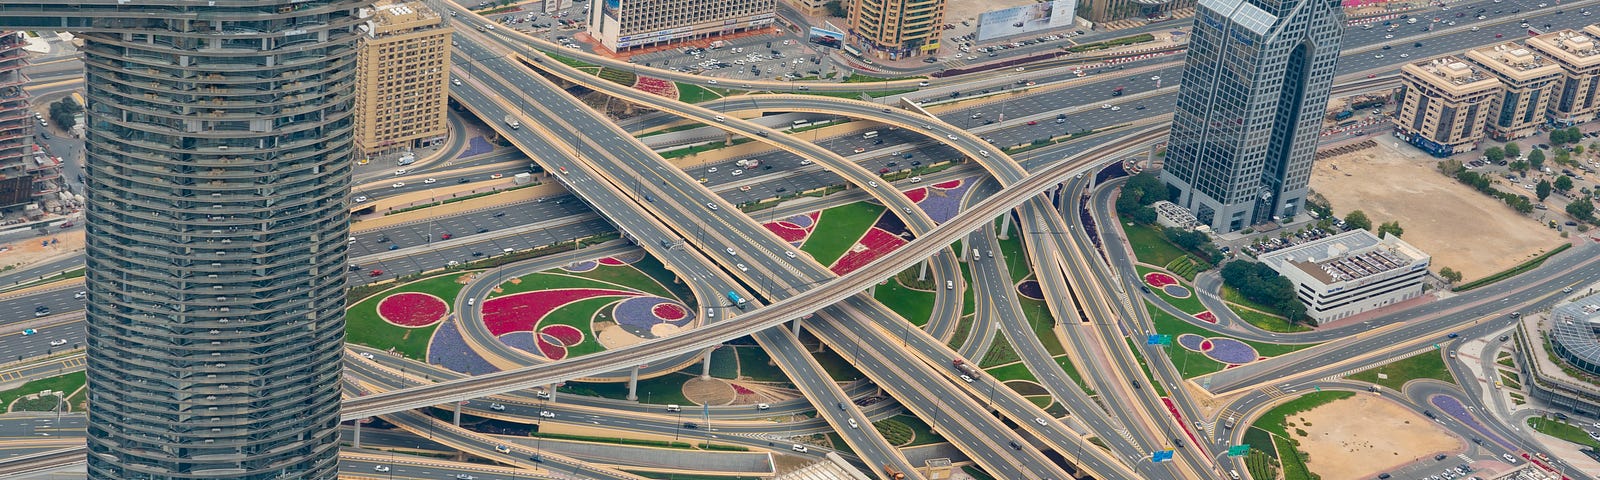 A chaotic highway scene from above.